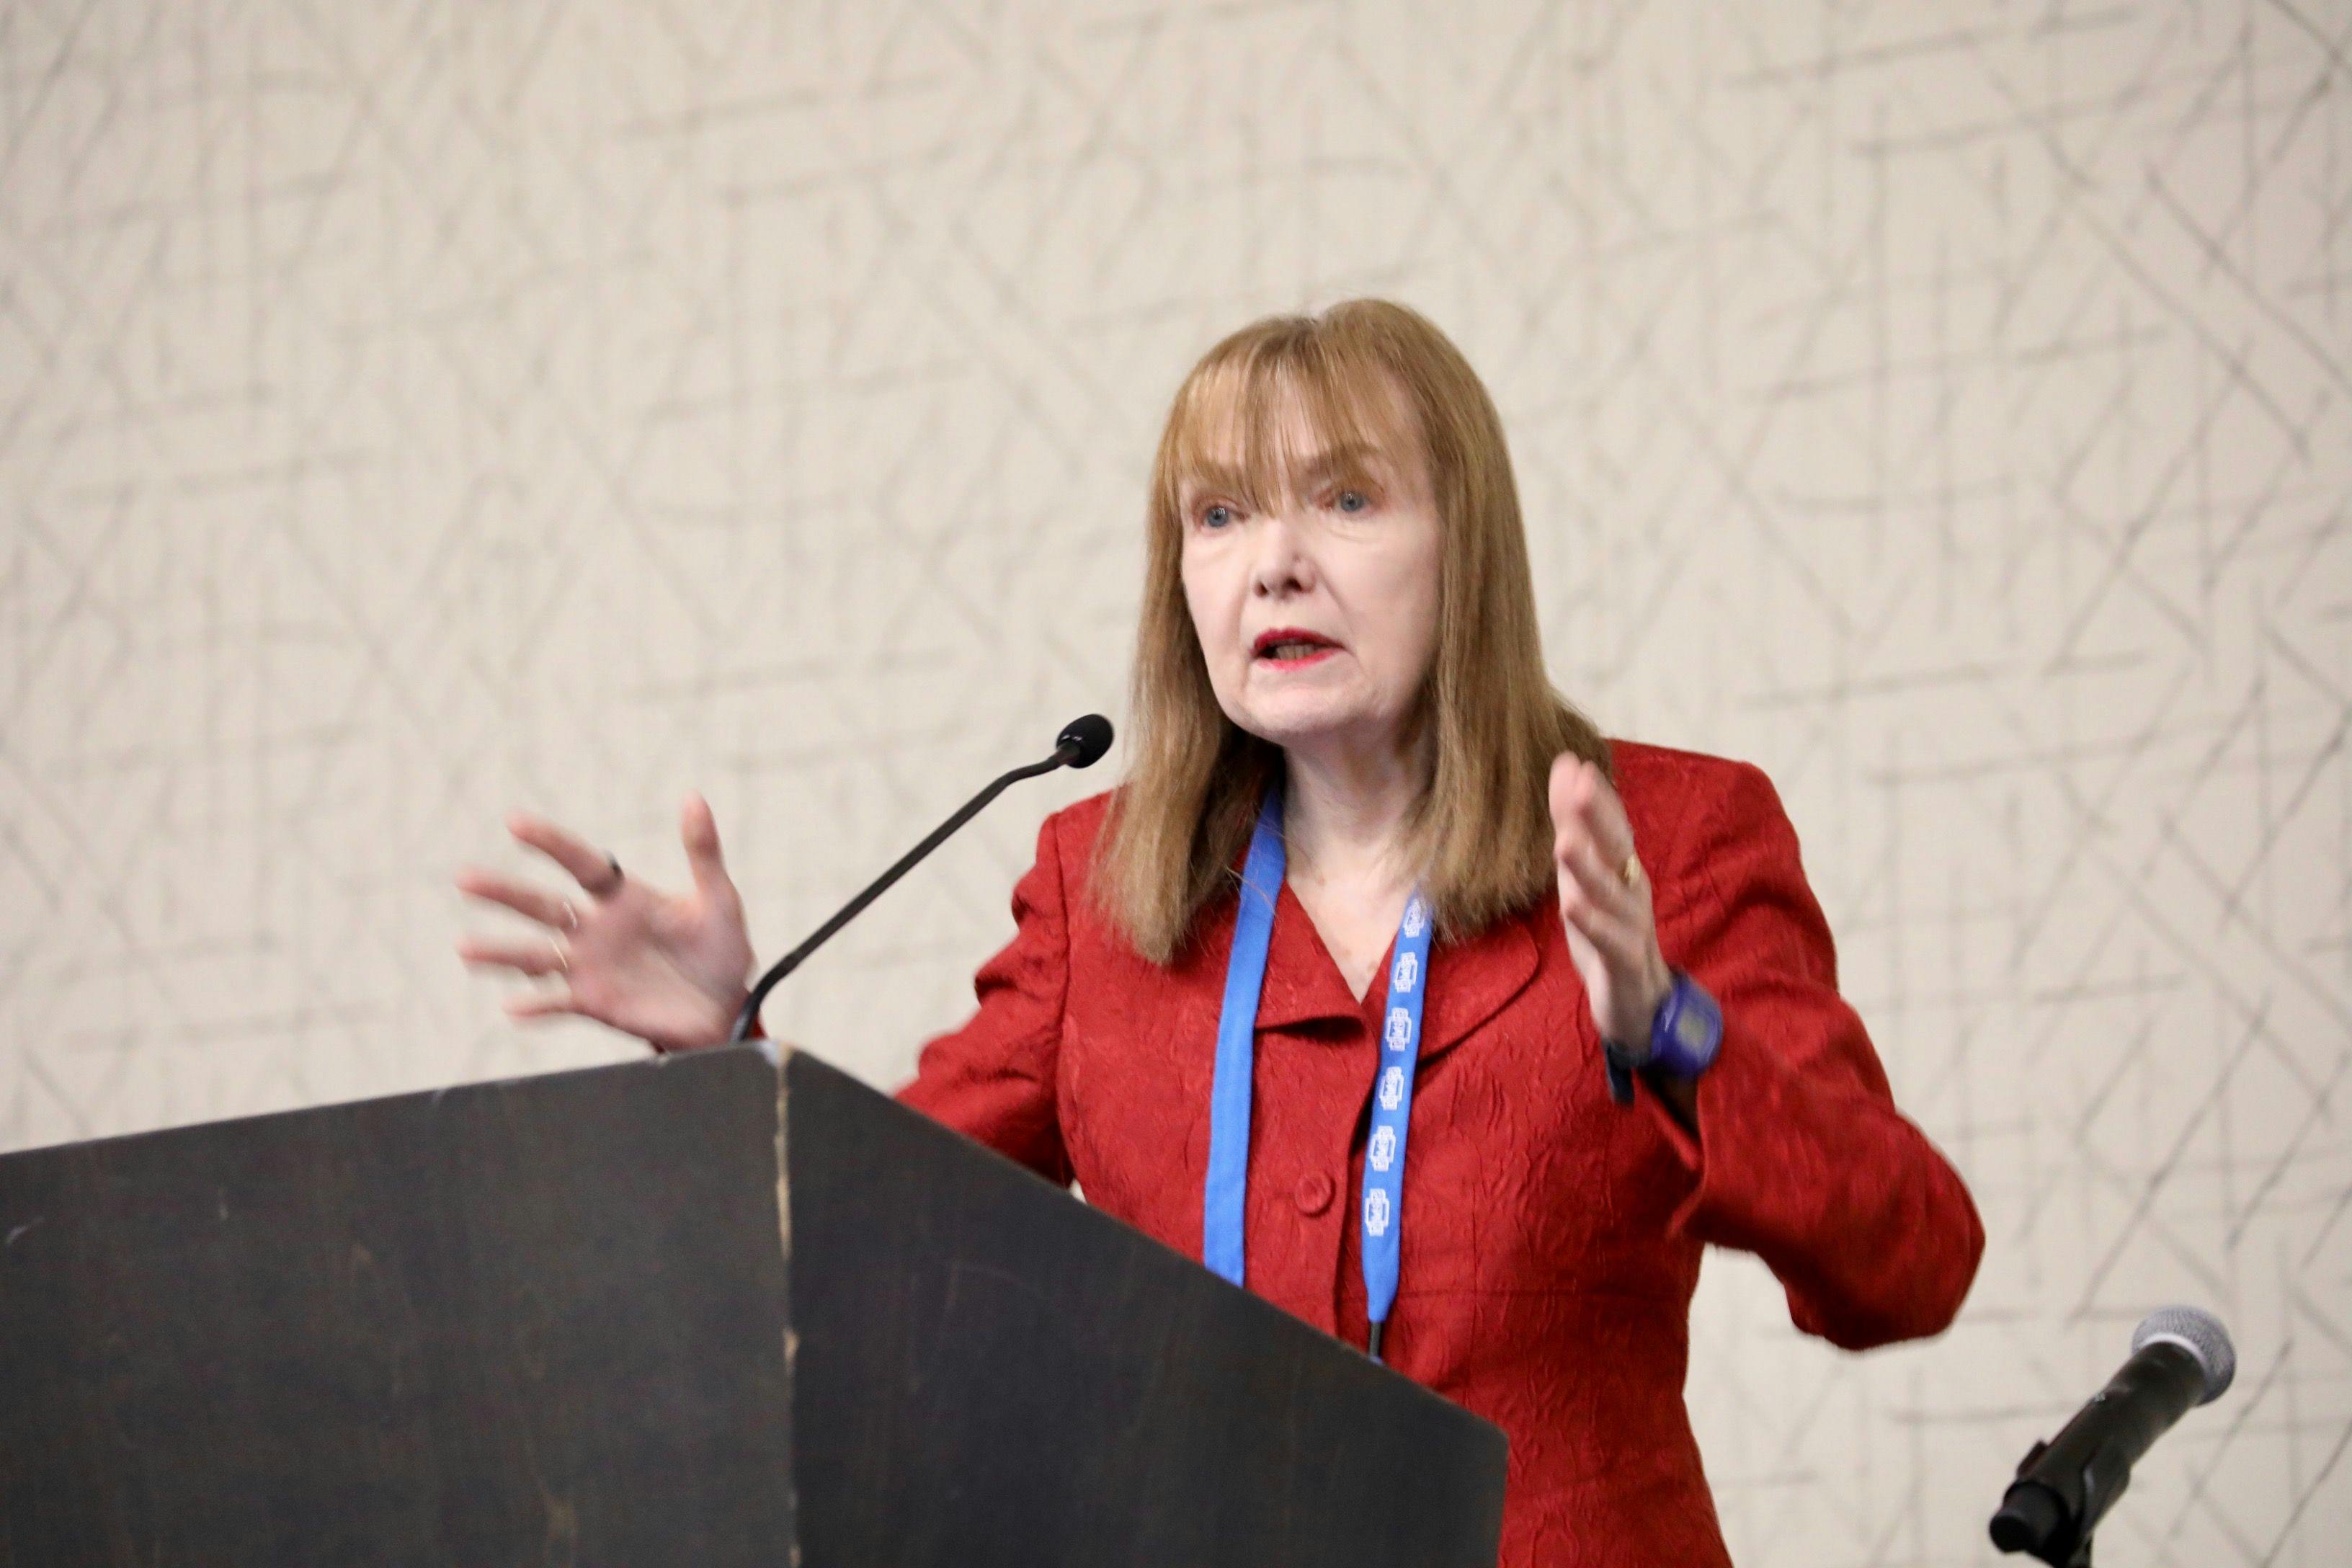 Patricia Coyle, MD, speaks to the room about COVID-19 and multiple sclerosis.
Image courtesy: Shmulik Almany